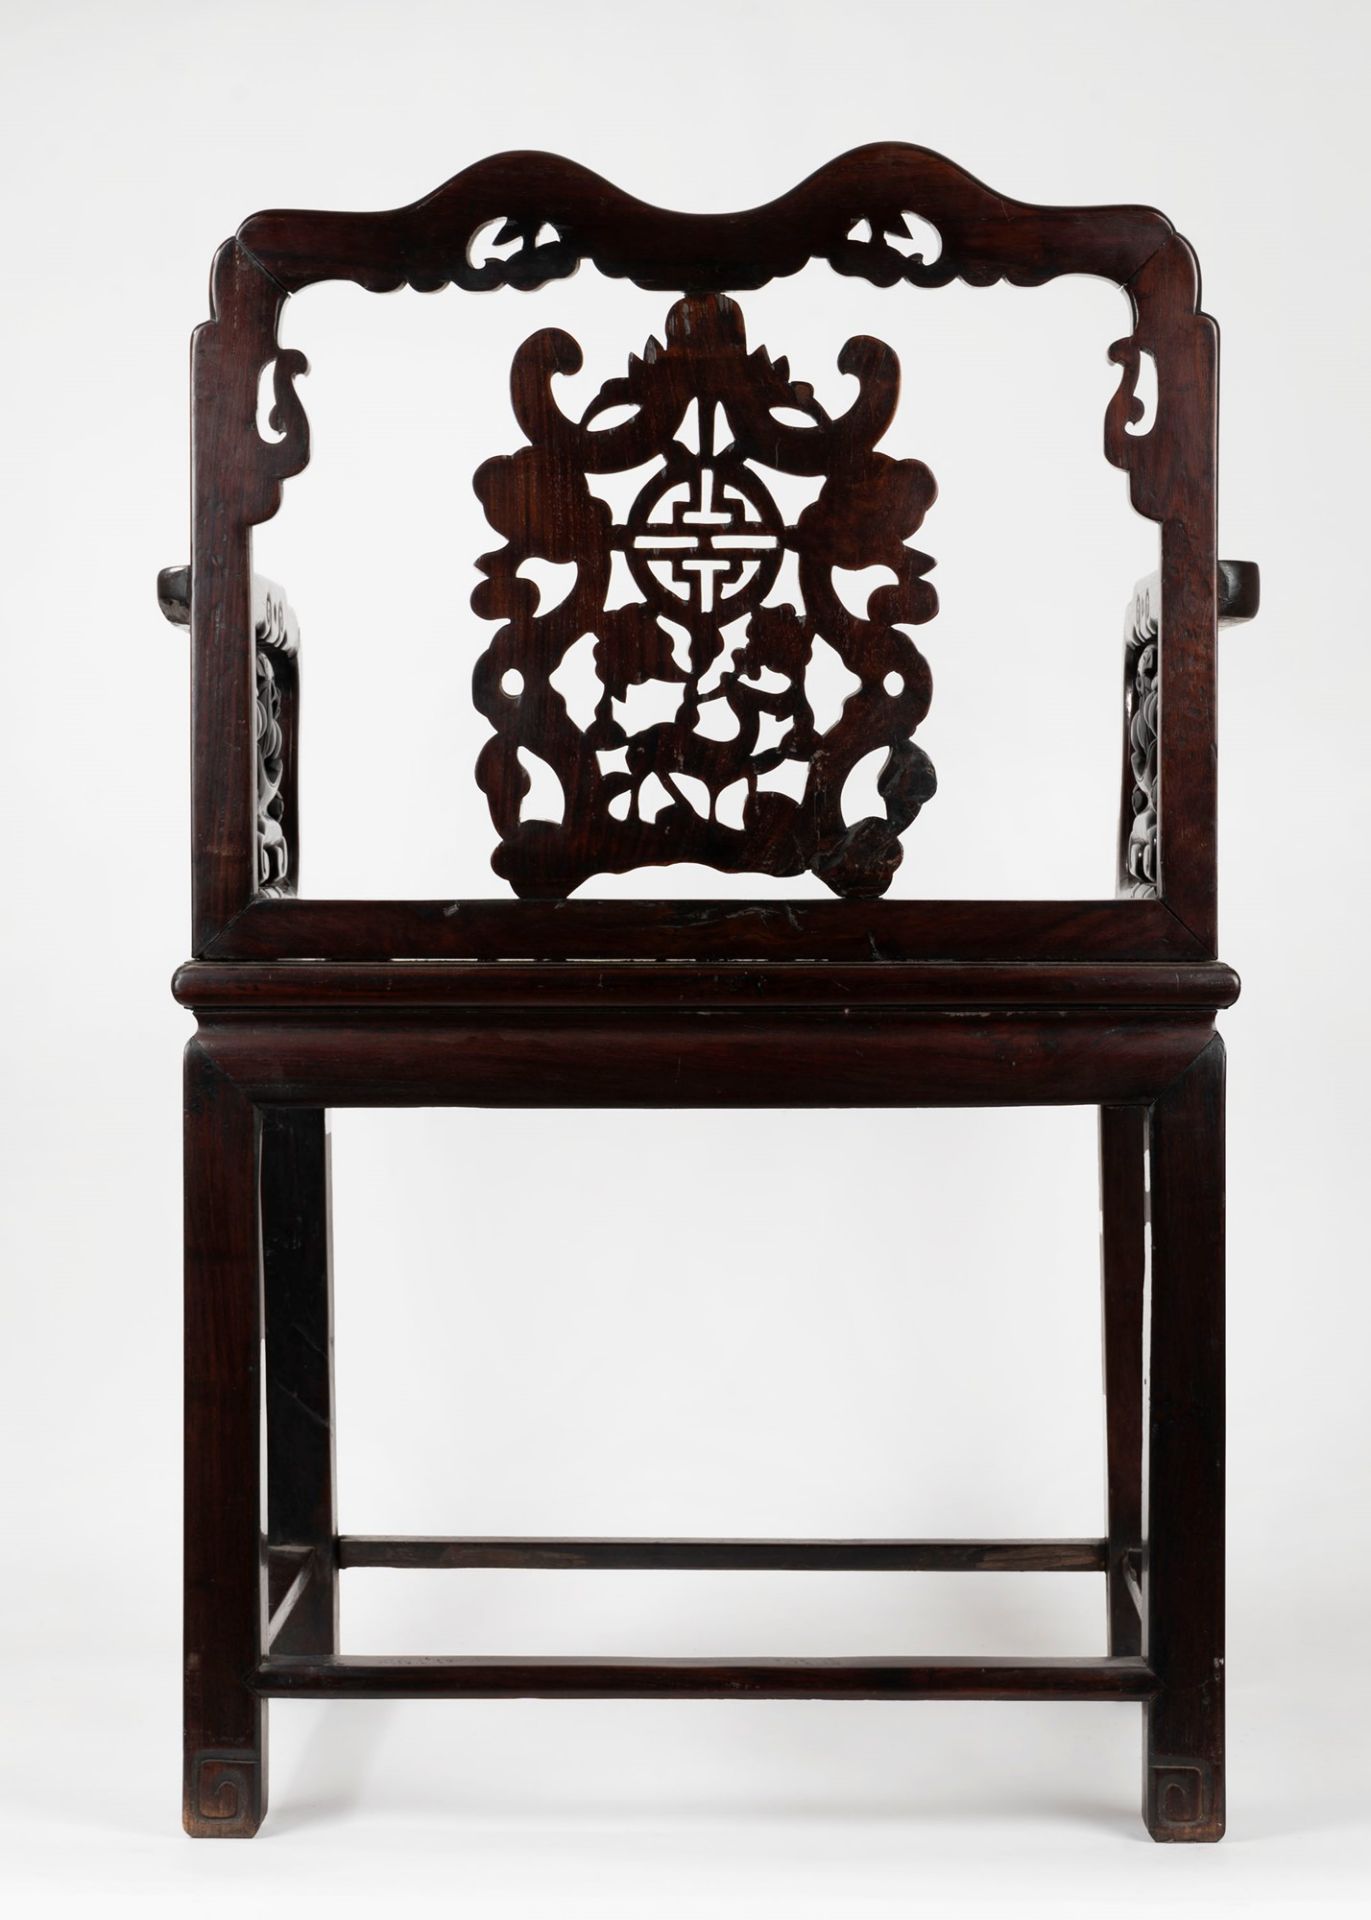 Pair of armchairs and a carved wooden table in oriental style, 20th century - Image 4 of 7